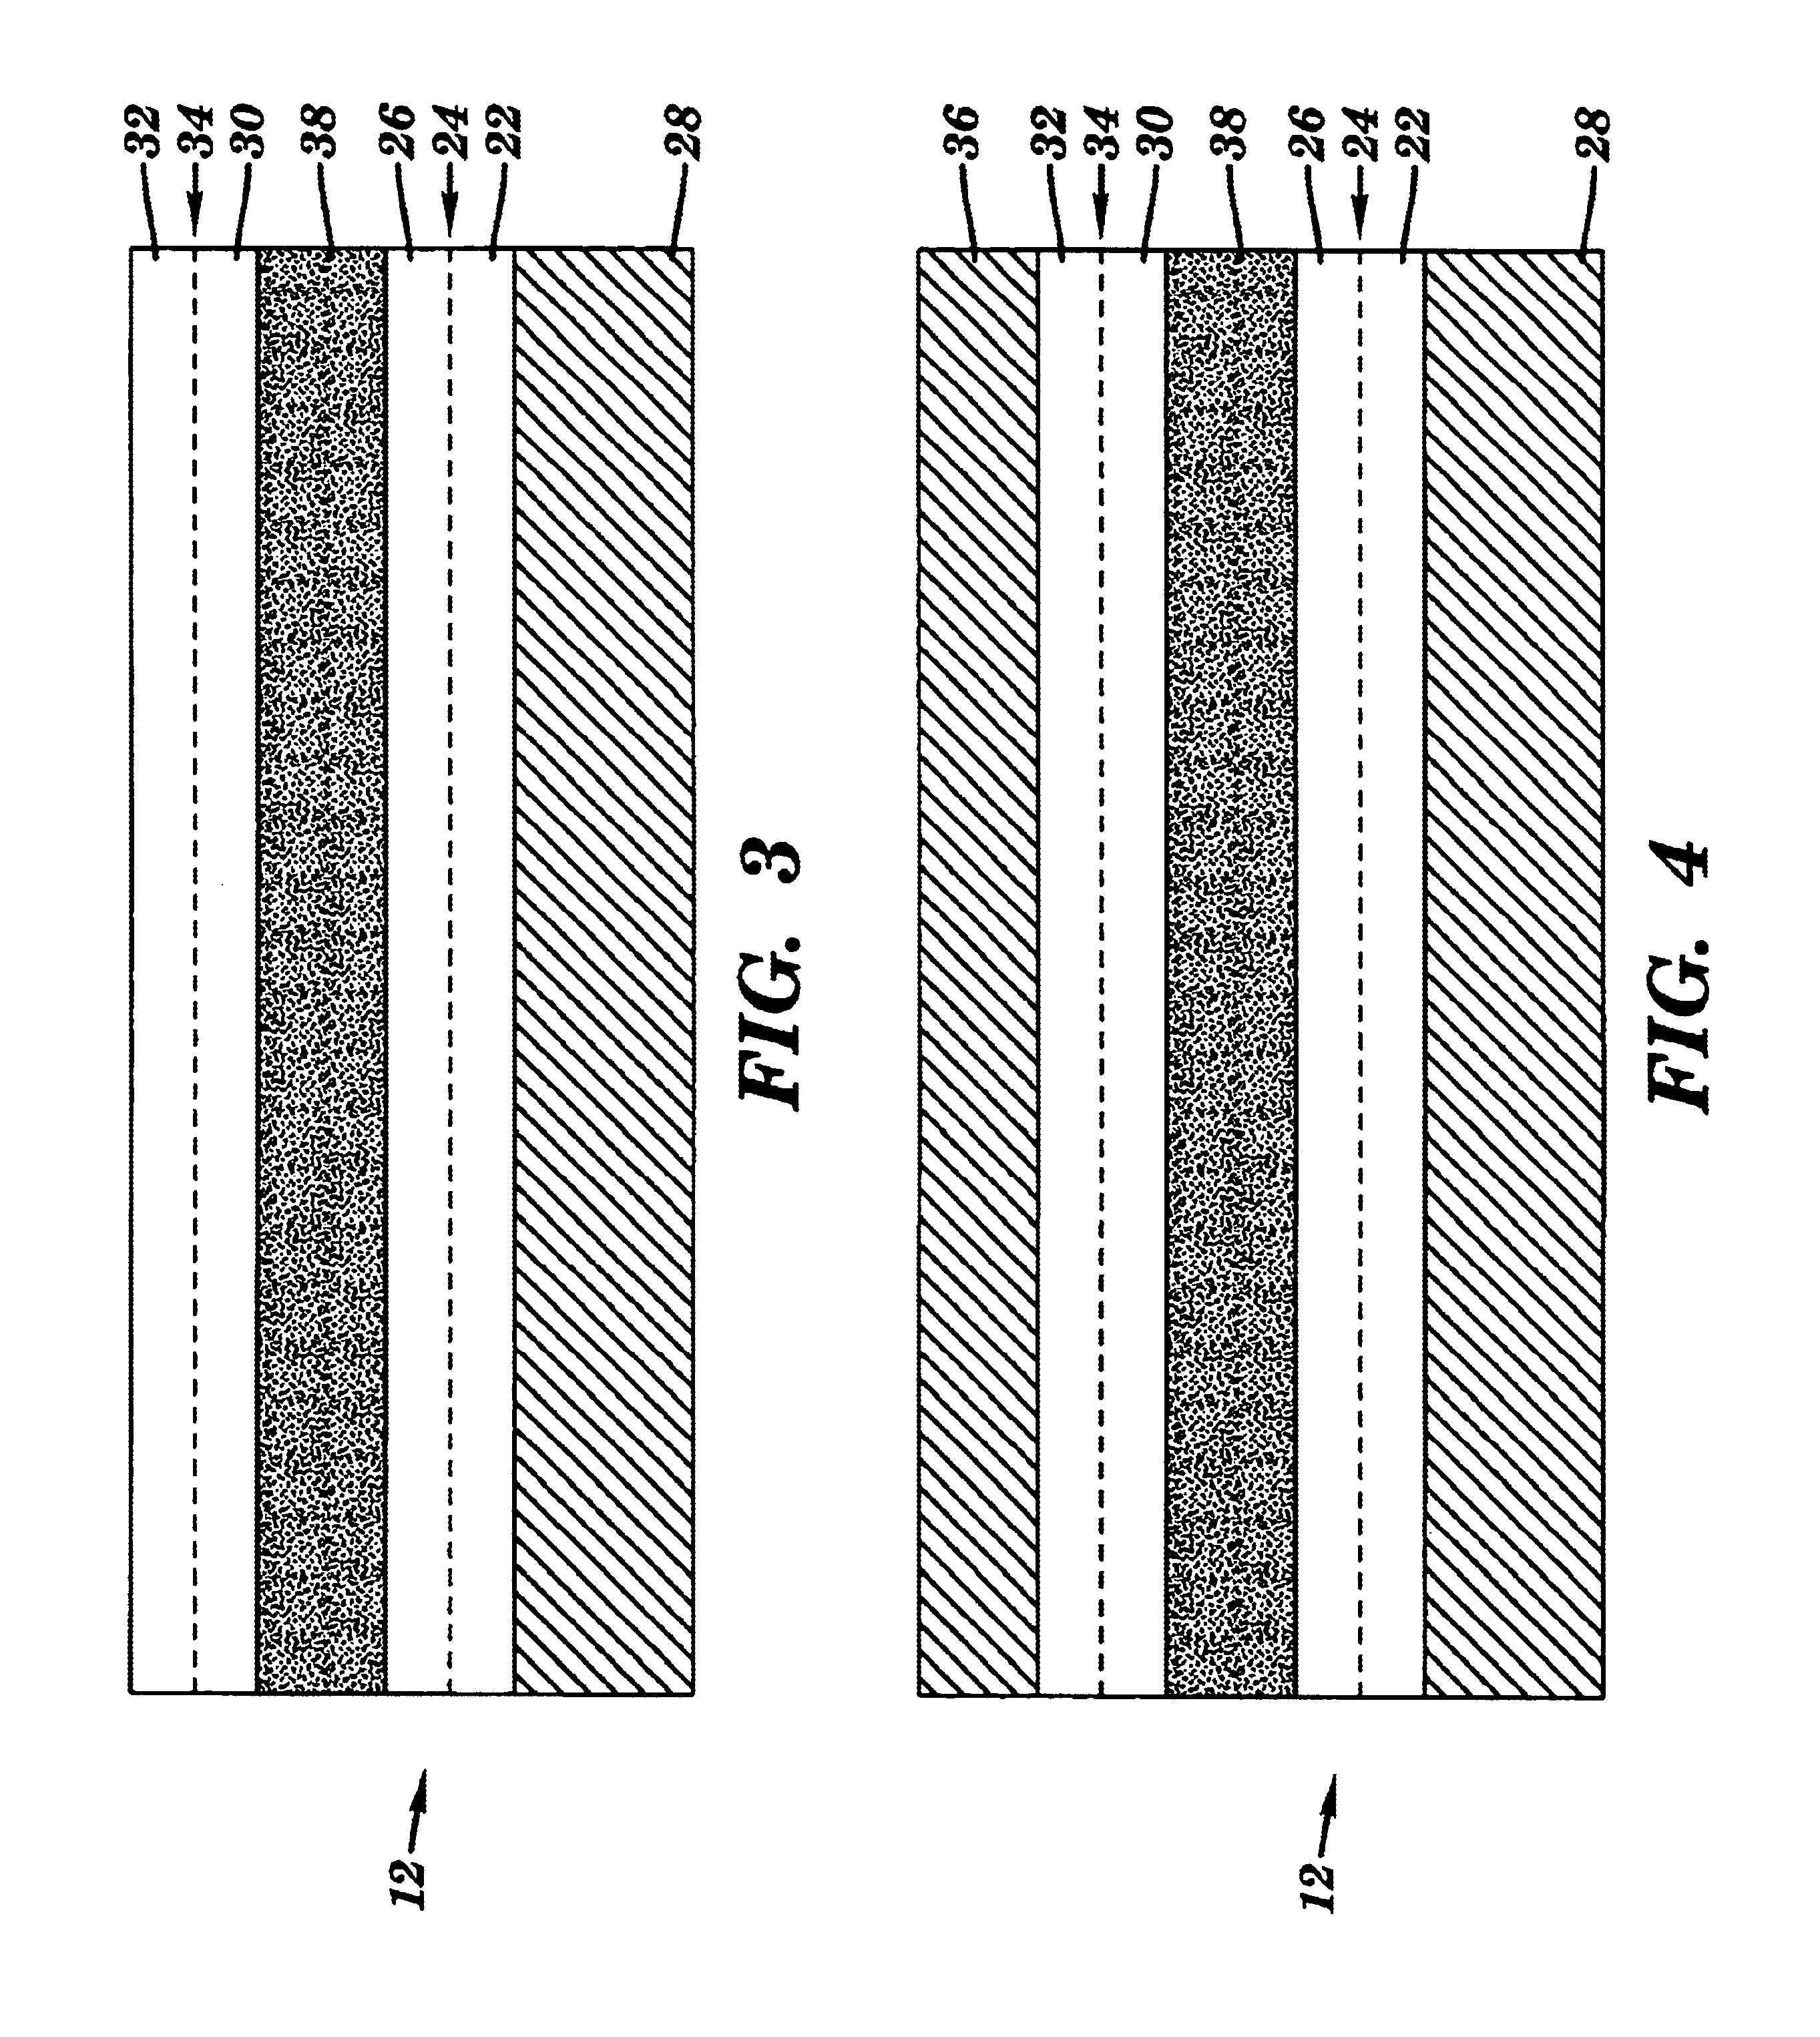 Electrostatic levitation and attraction systems and methods